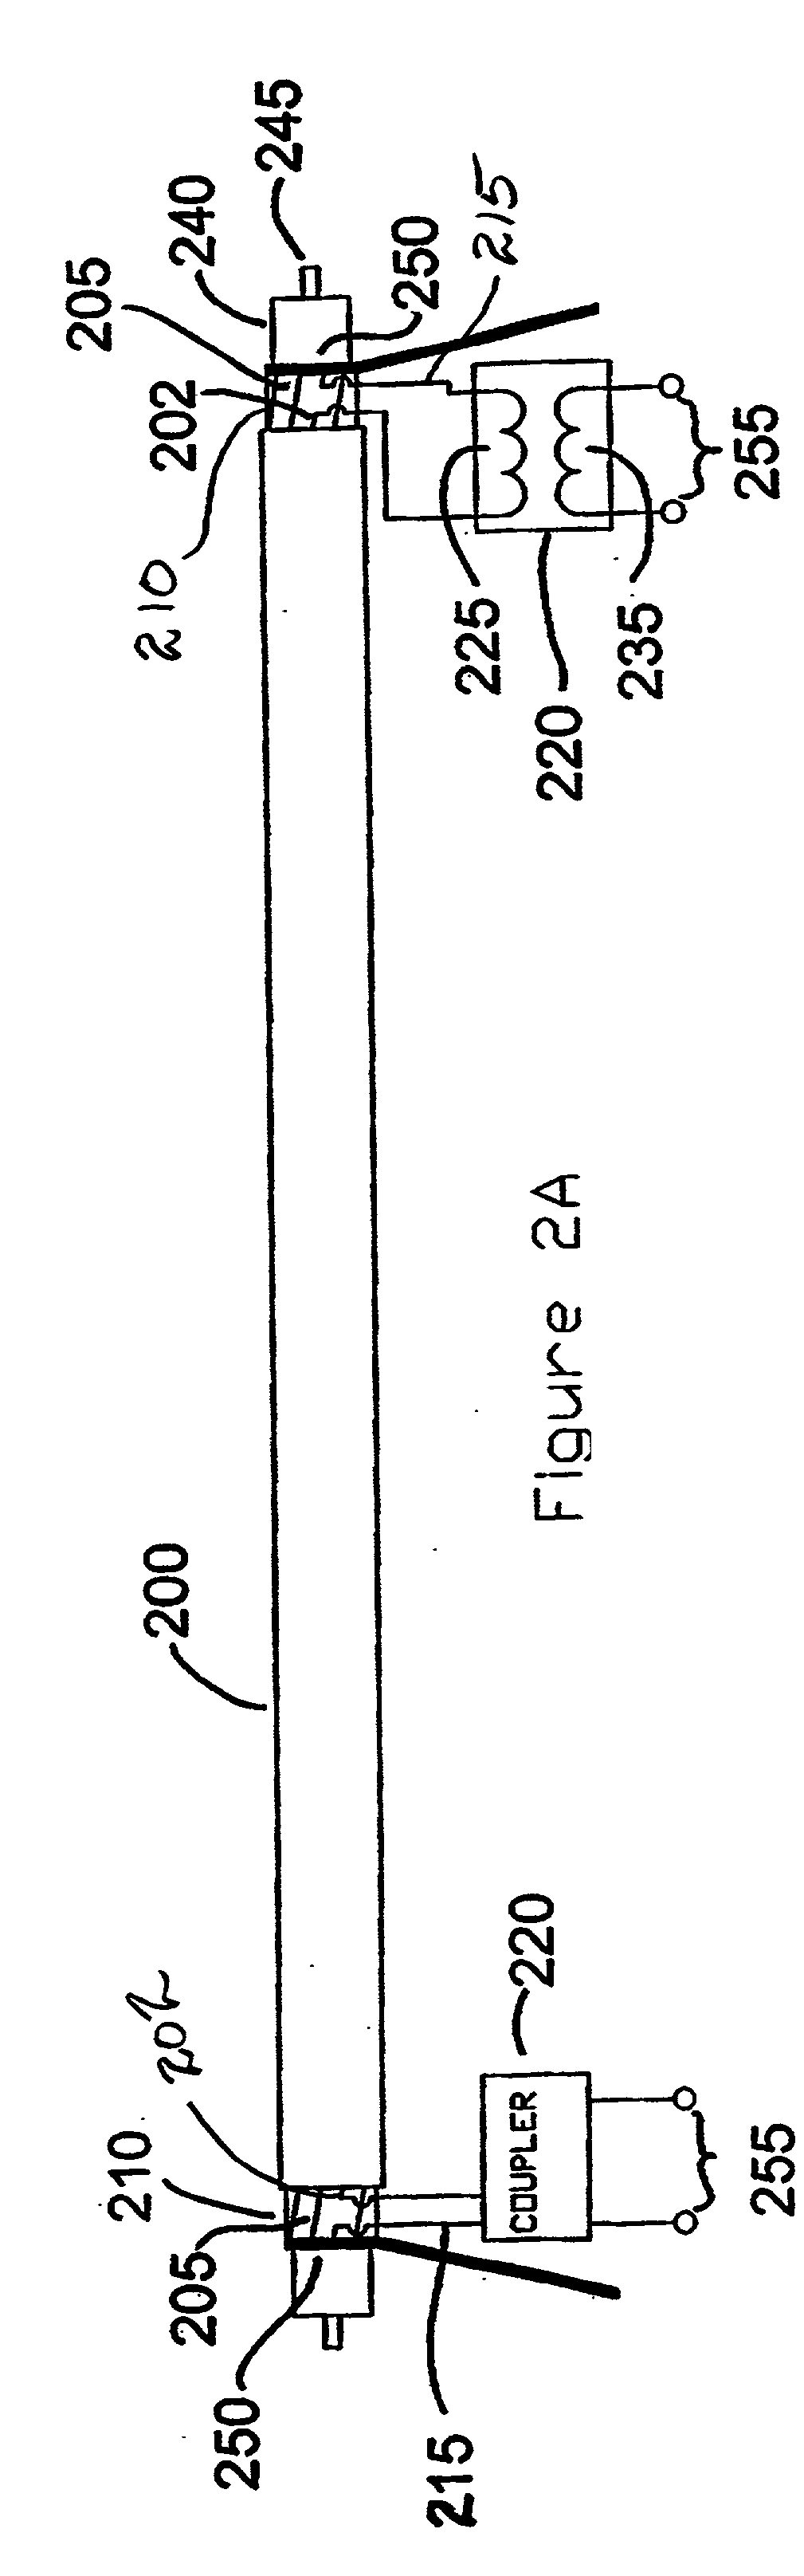 Inductive coupling of a data signal to a power transmission cable